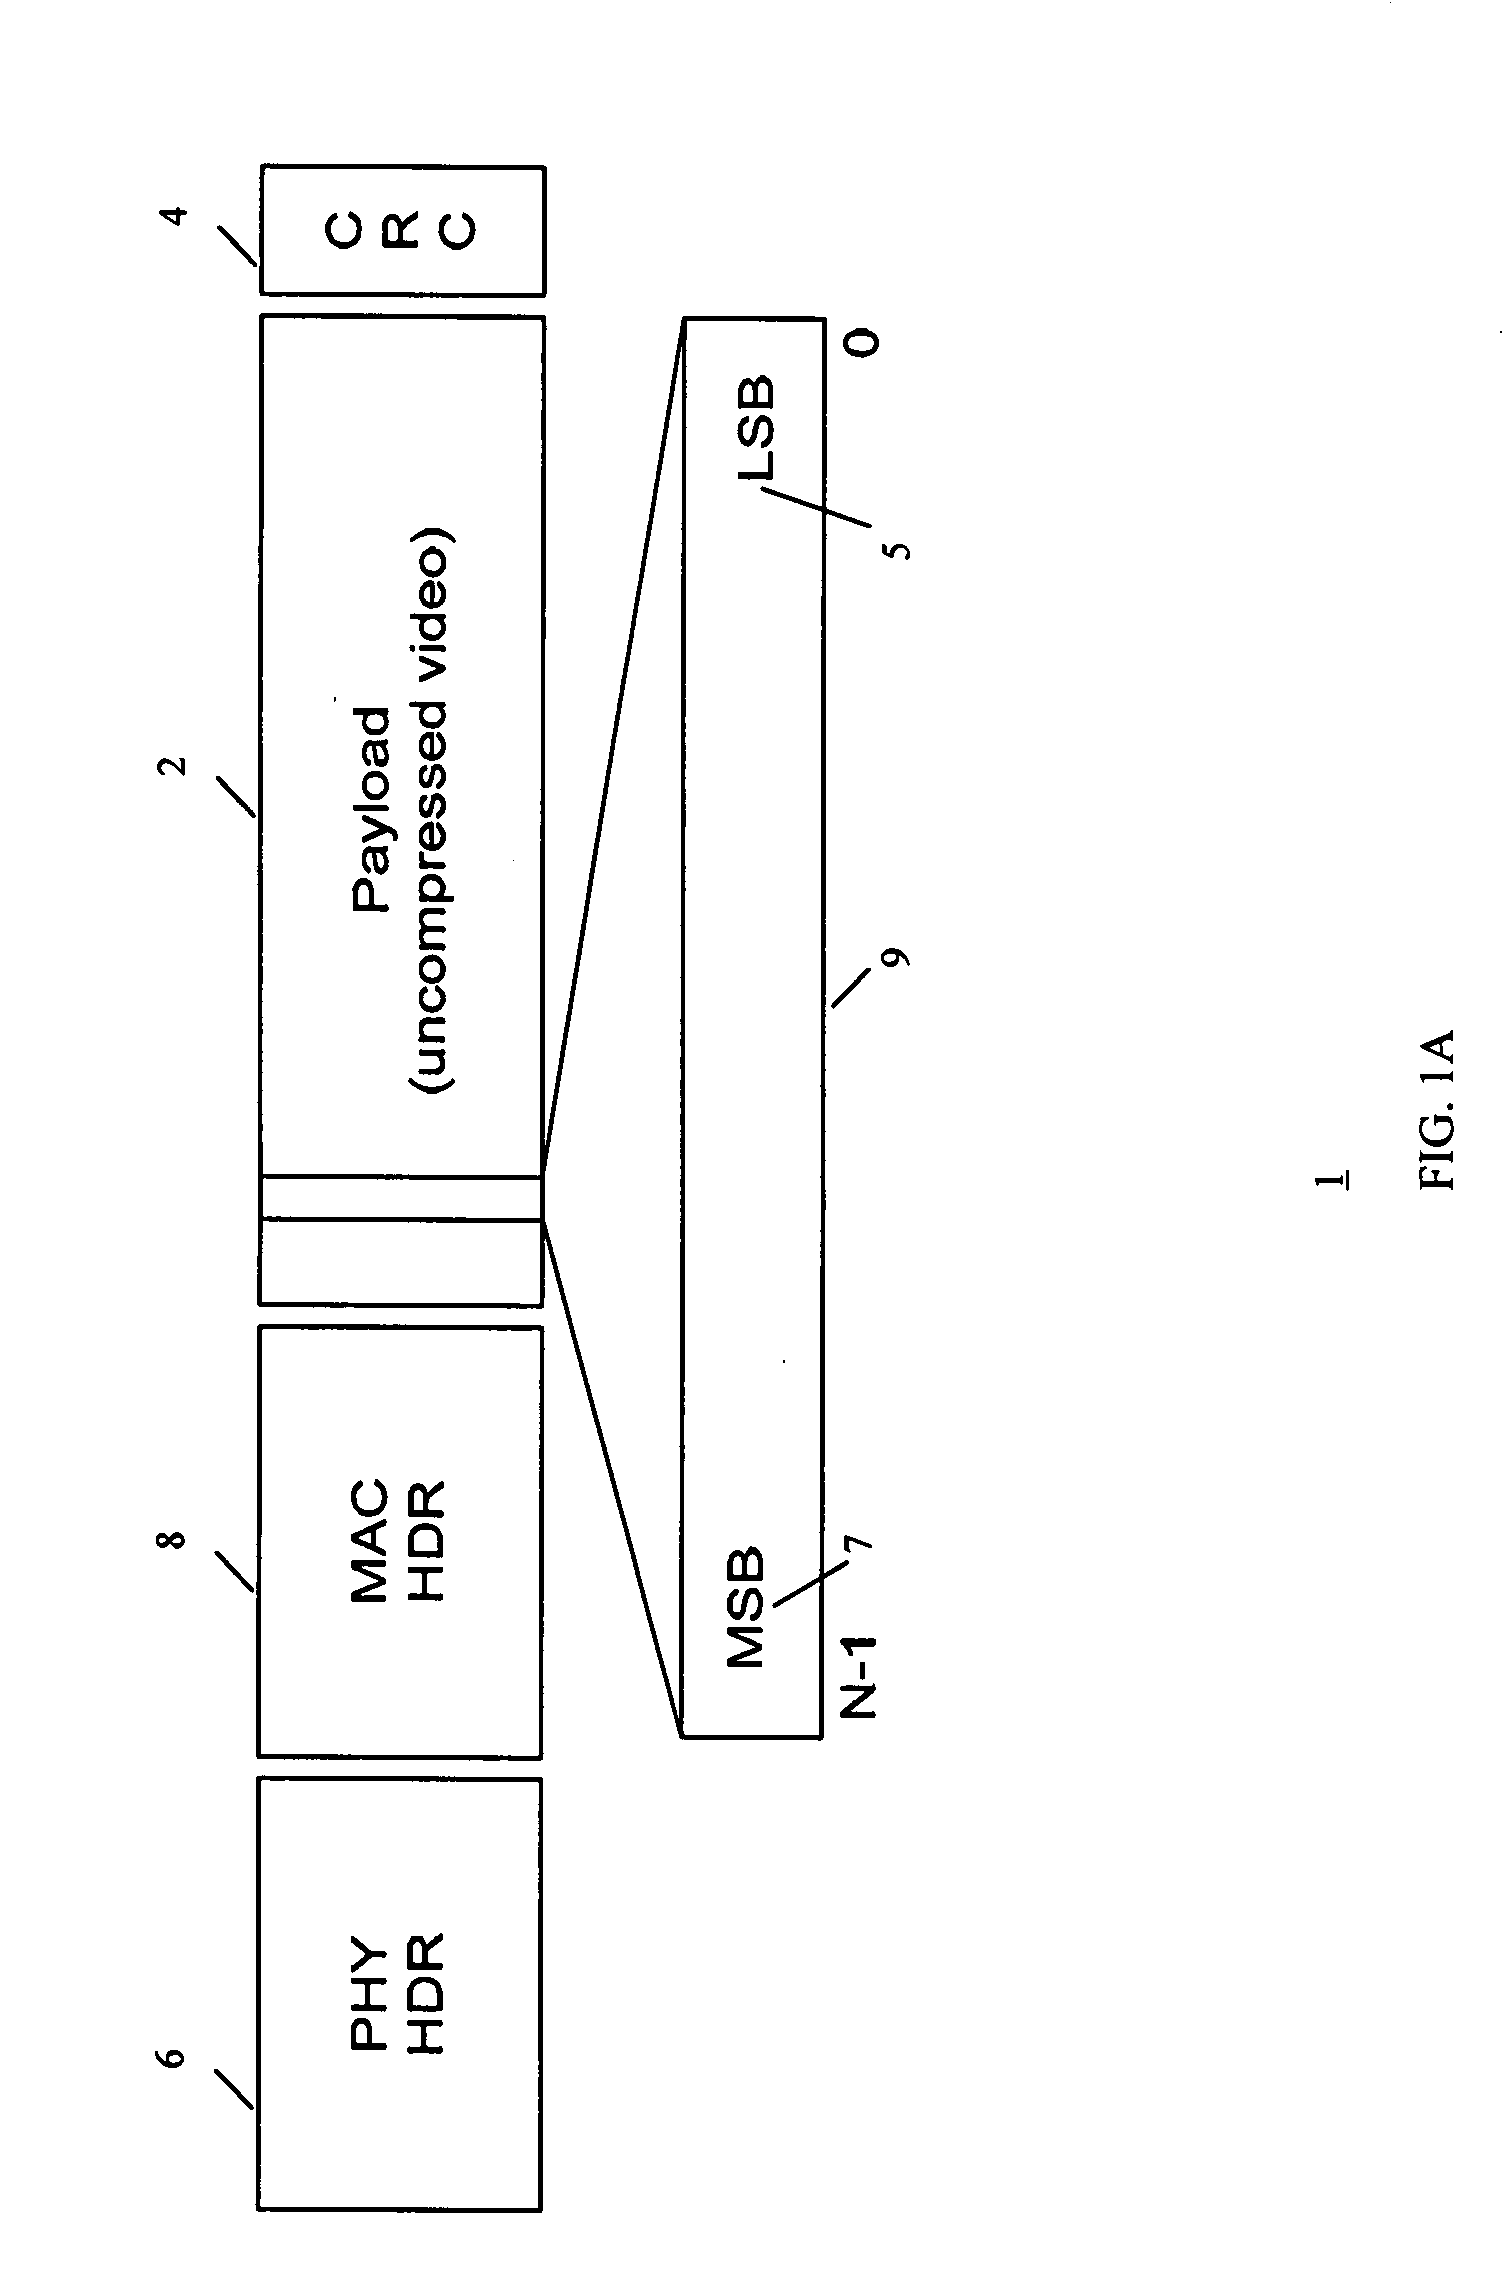 Method and system for transmission of uncompressed video over wireless communication channels